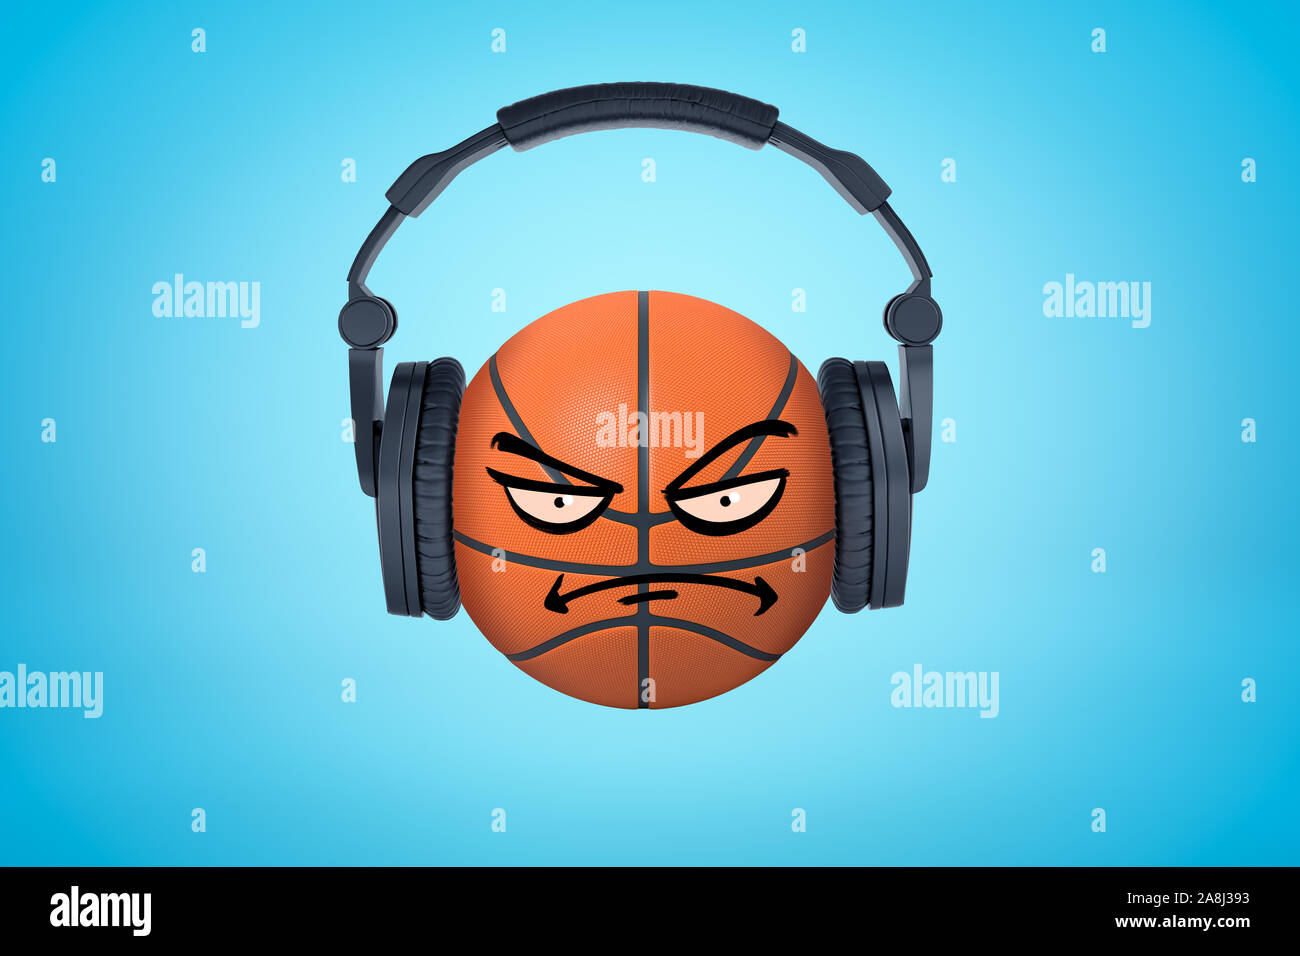 3d rendering of smiley faced basketball ball wearing black headphones on  blue background. Sound and vision. Music and noise. Digital art Stock Photo  - Alamy